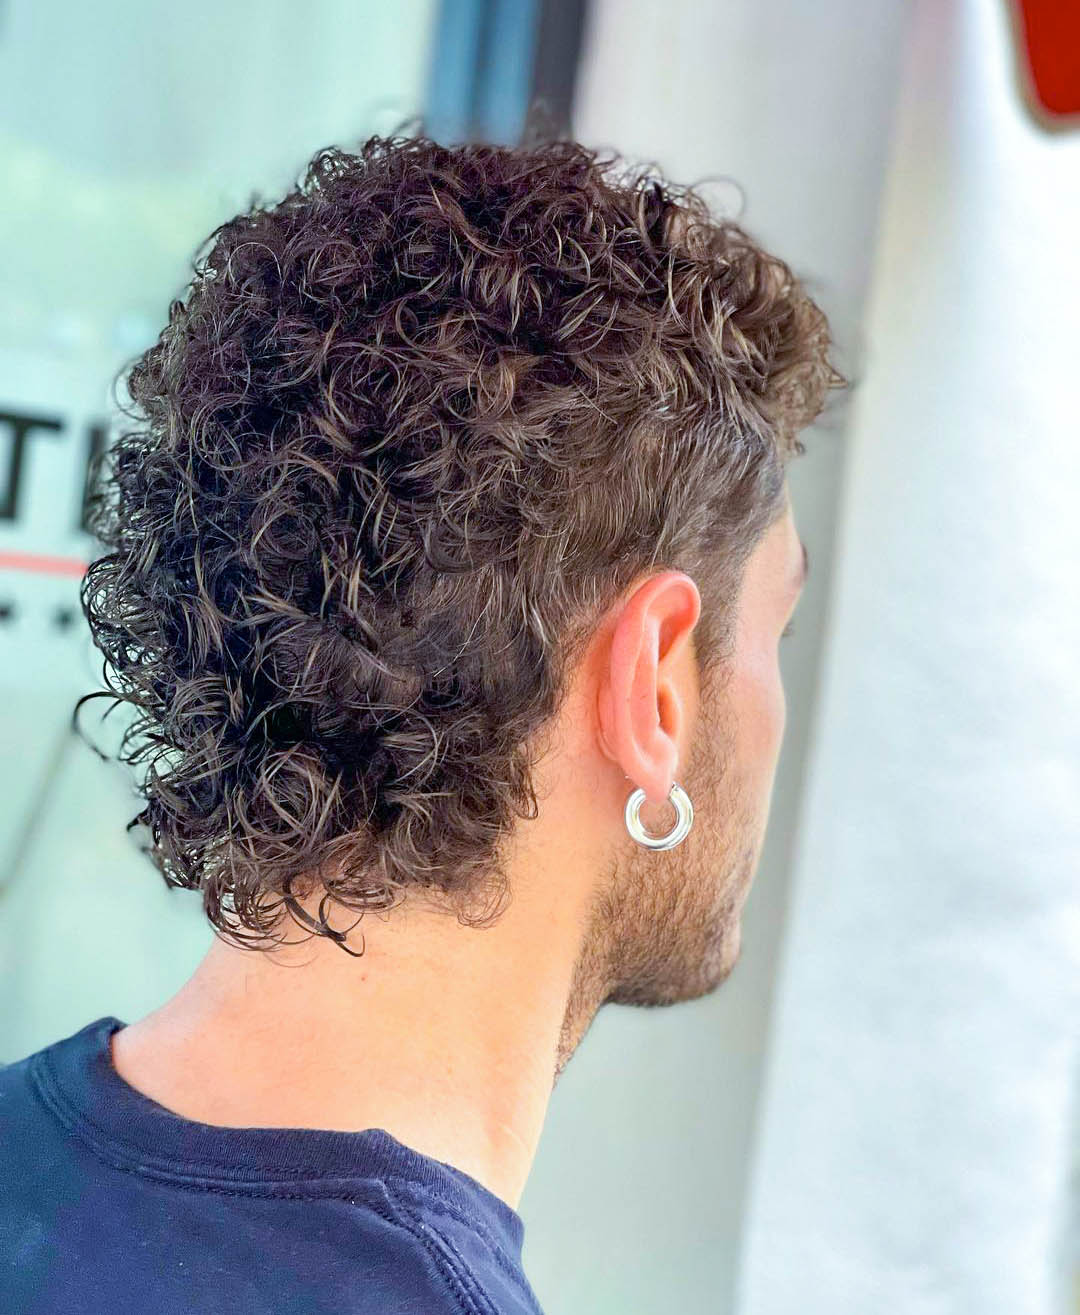 Short Mullet with a Perm